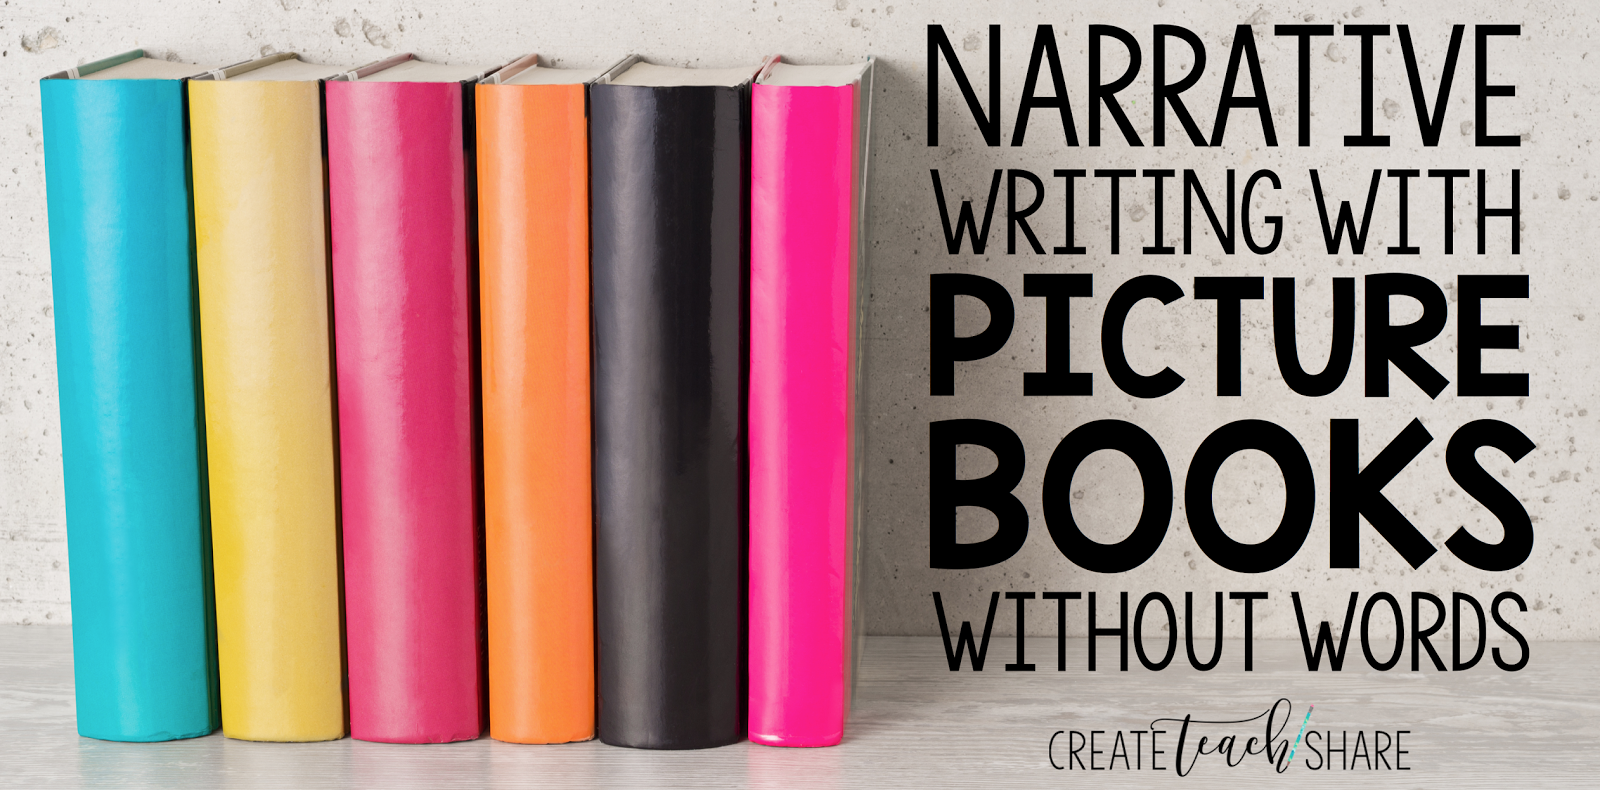 Narrarive Writing with Picture Books Without Words - Create Teach